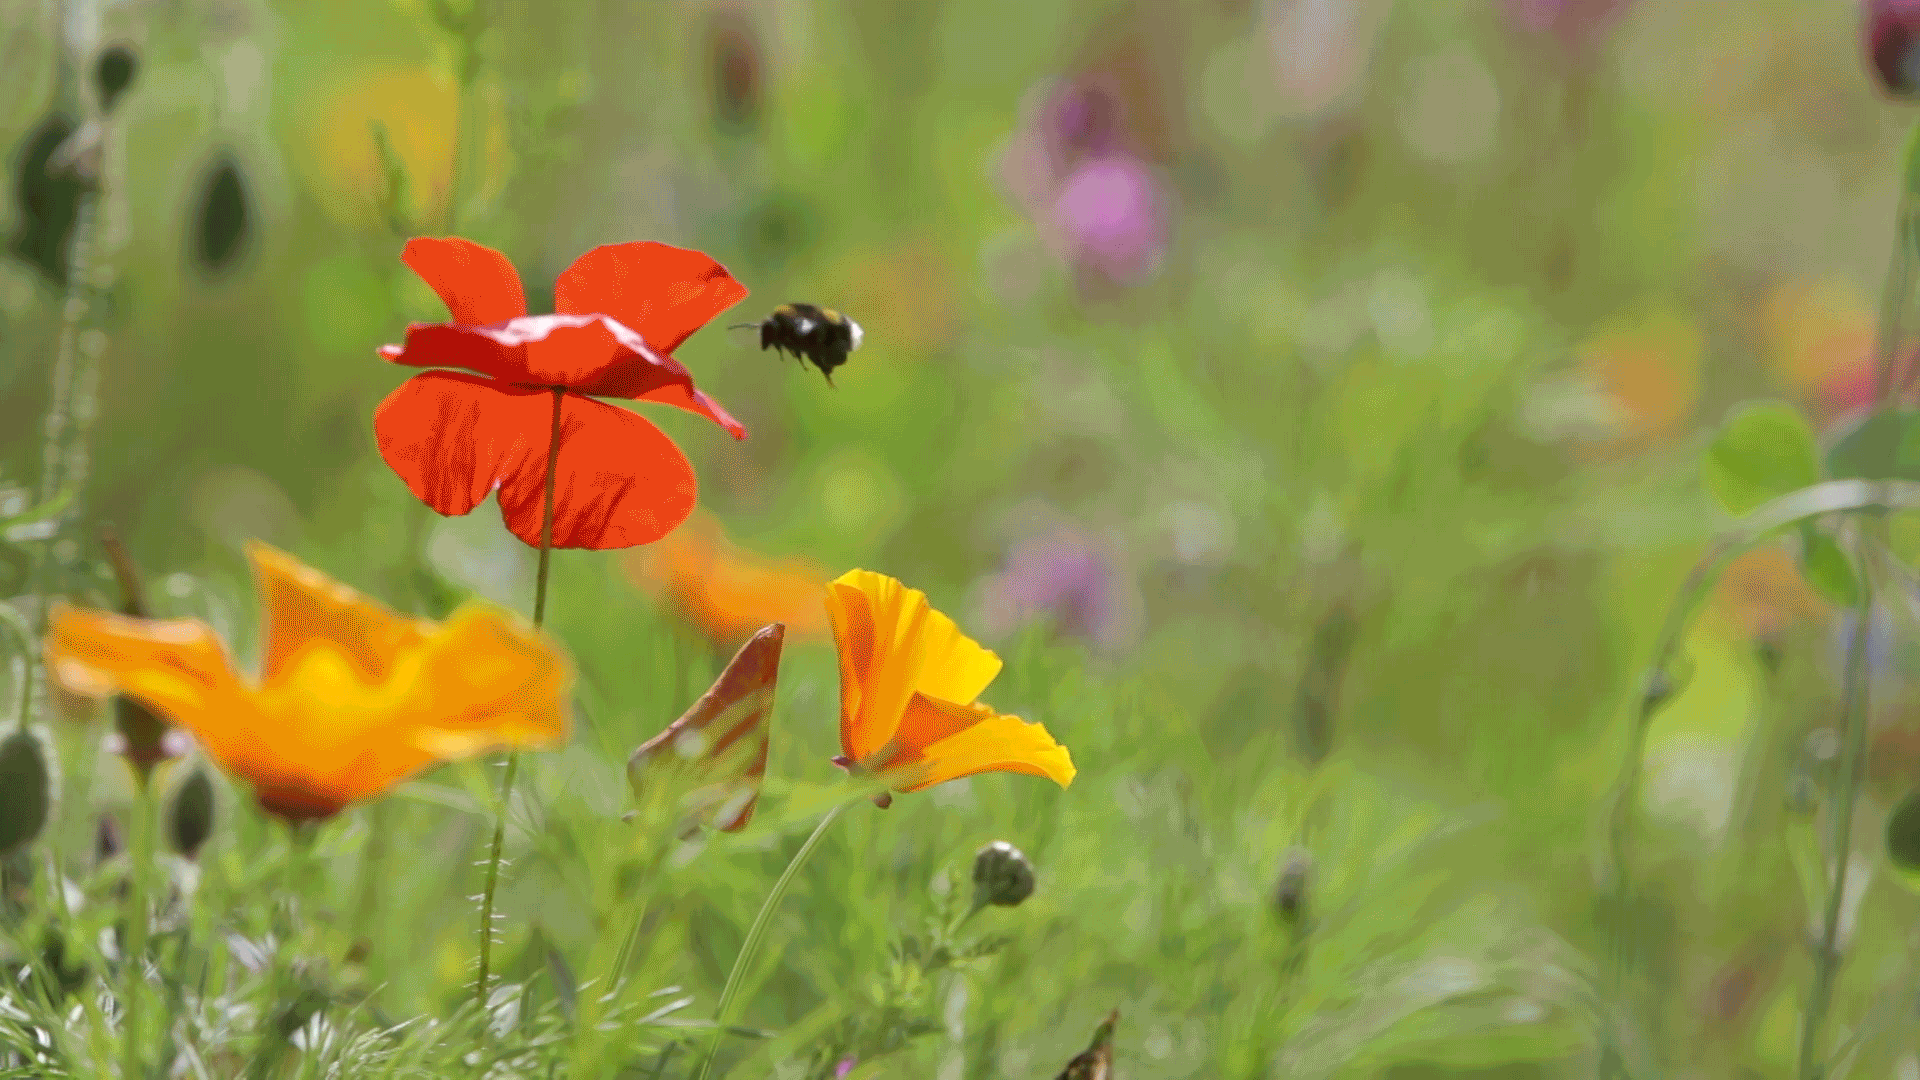 Gif of a bee flying around a red poppy in a field of flowers